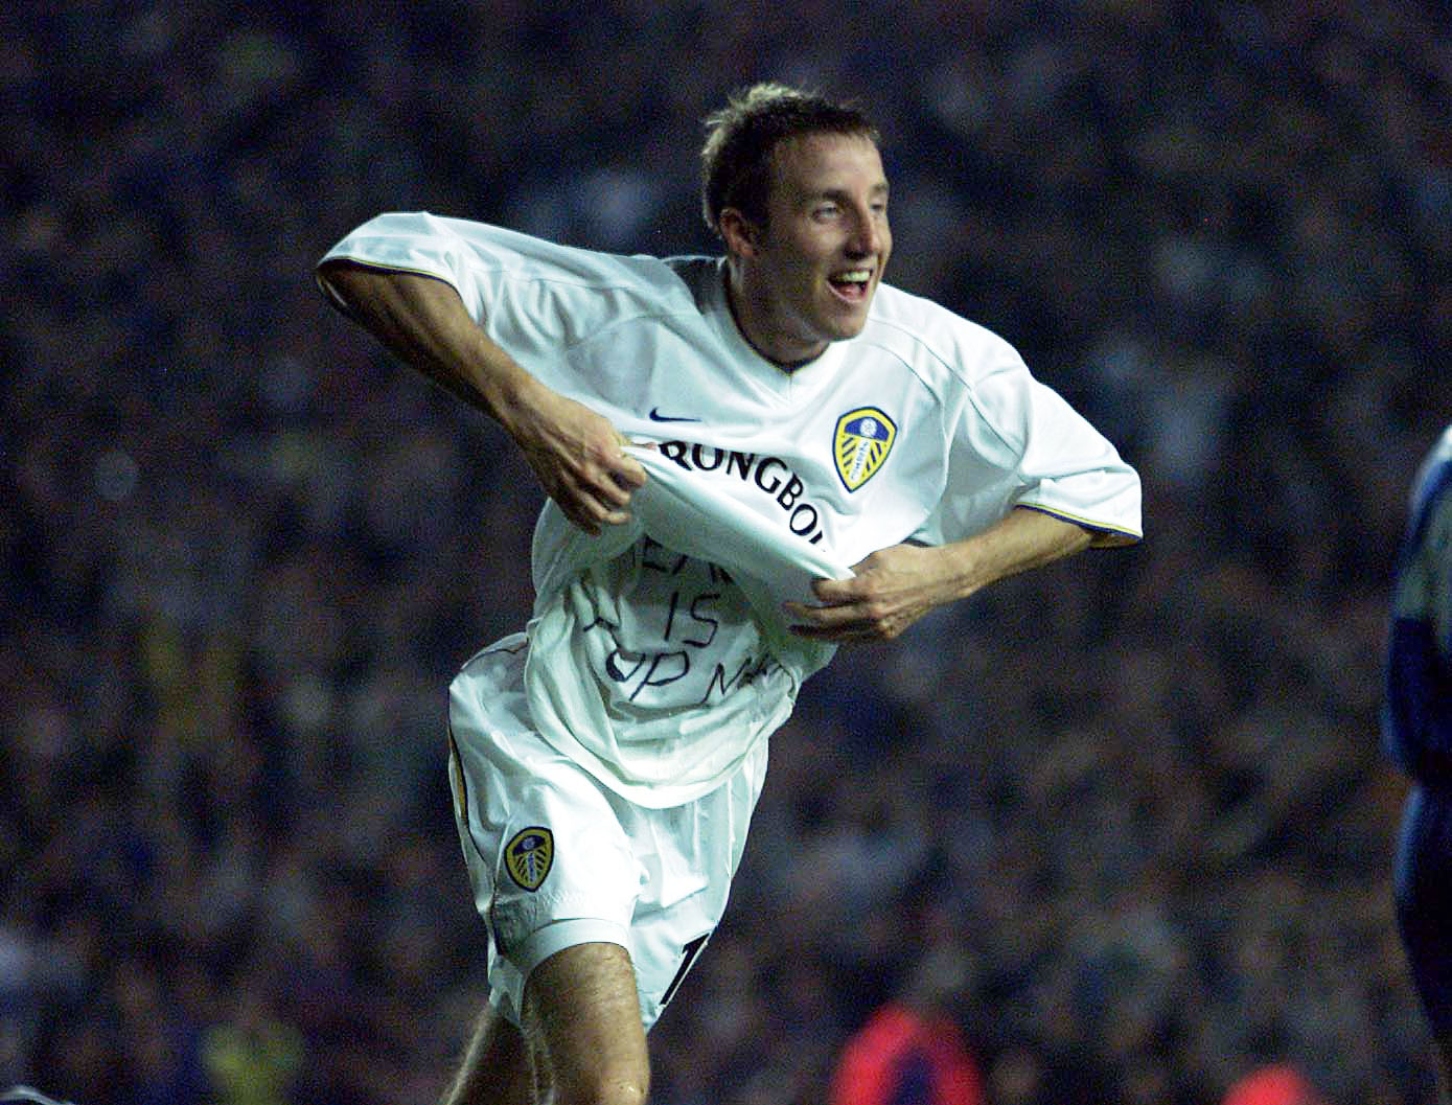 Lee Bowyer at Leeds United 